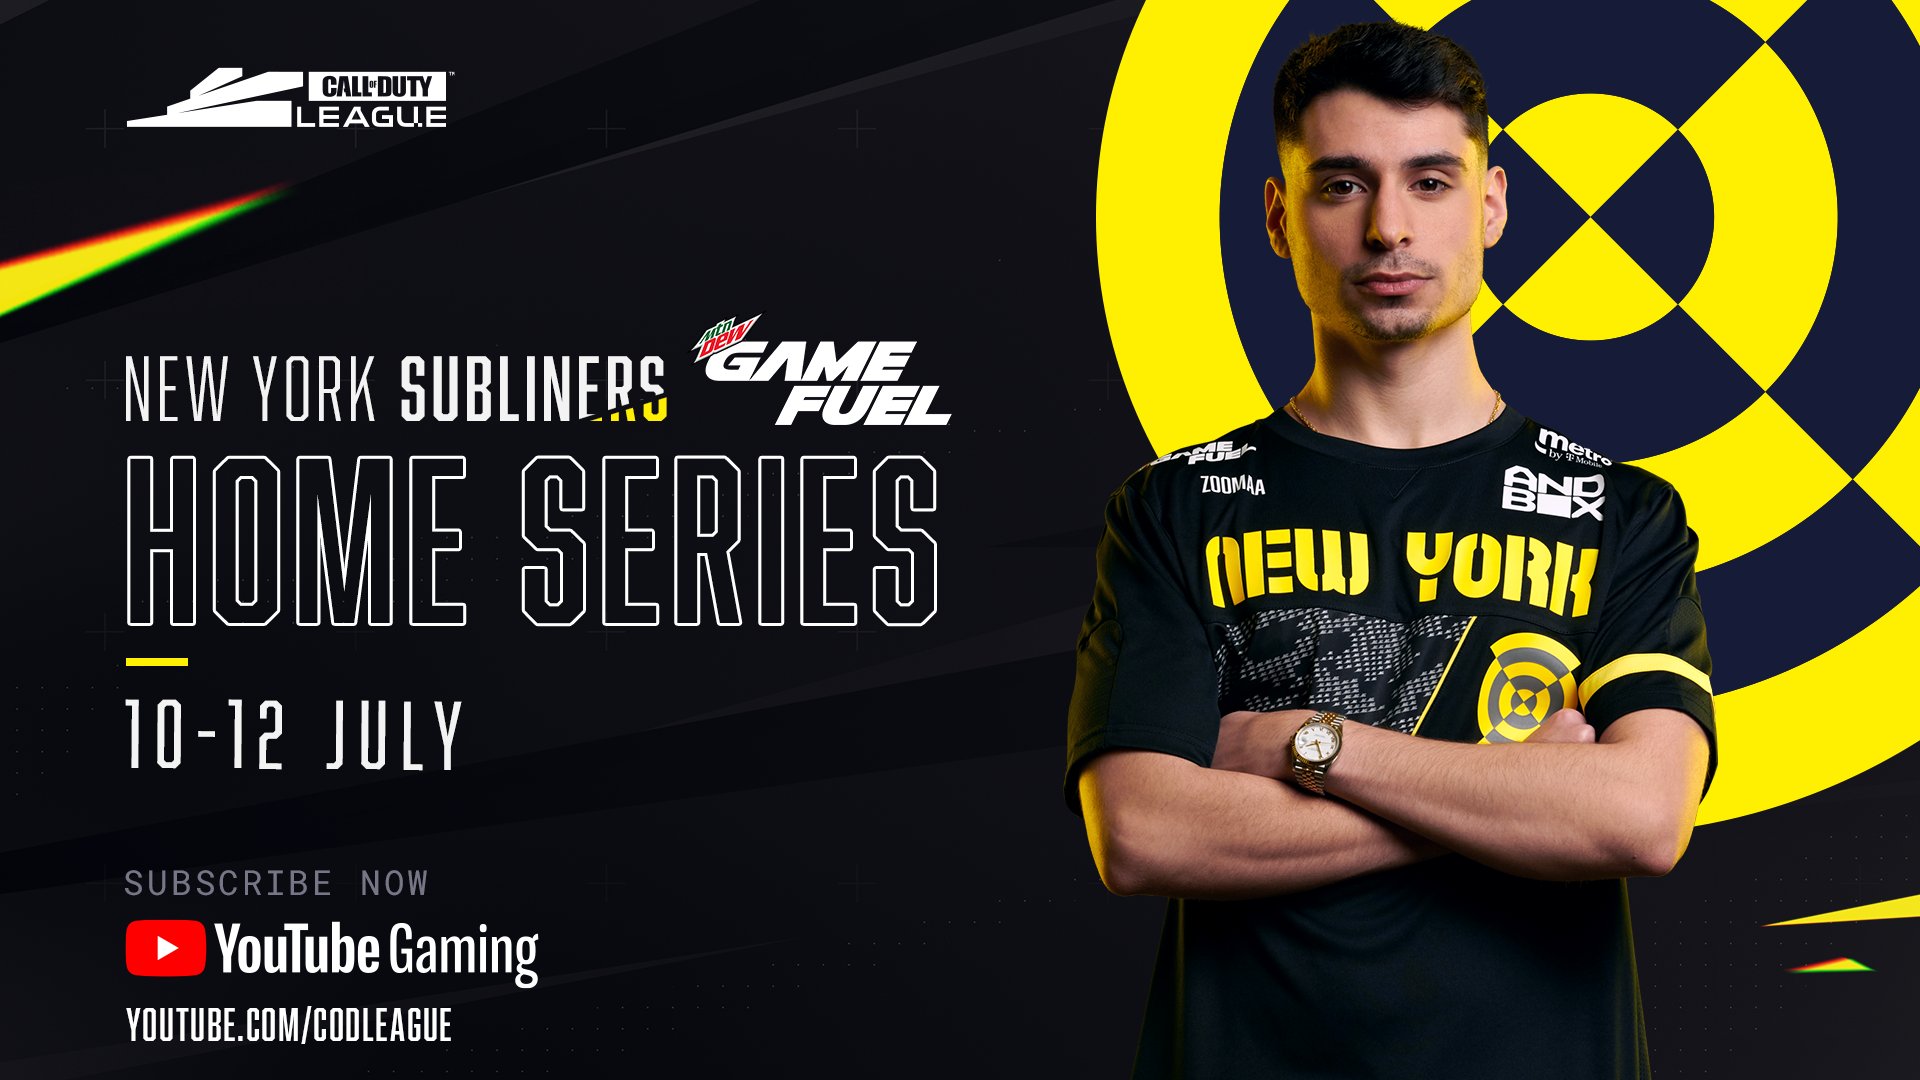 How to watch New York Subliners Home series: stream, schedule & more